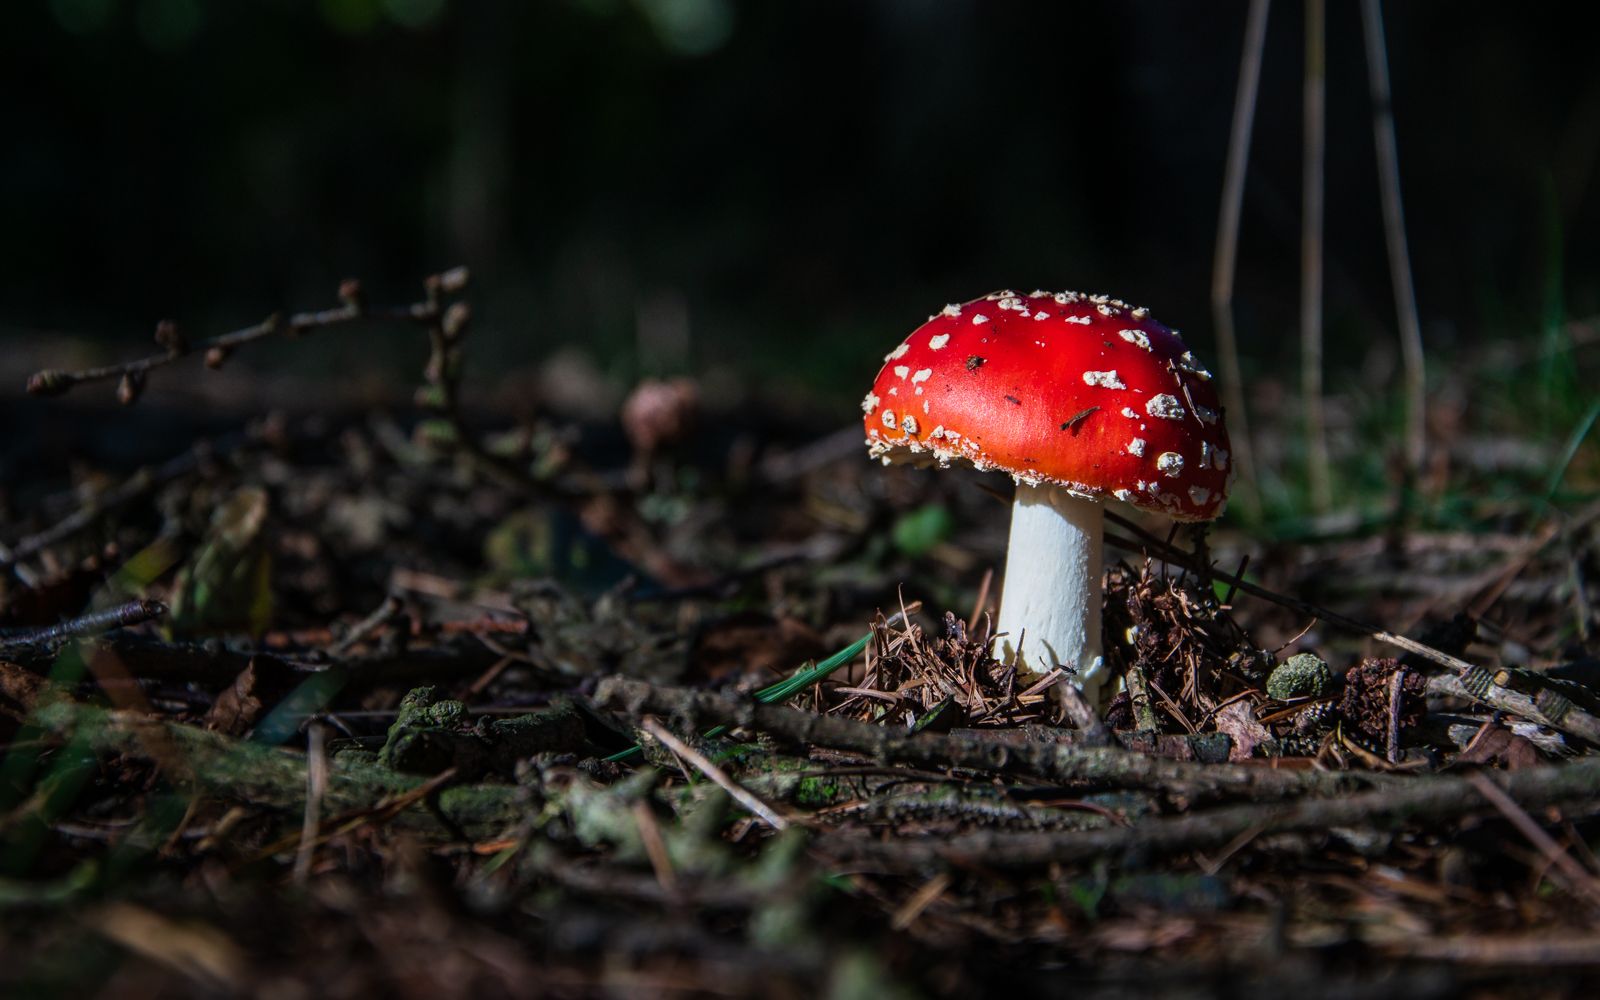 A classic toadstool of red and white spots stands alone on the forest floor